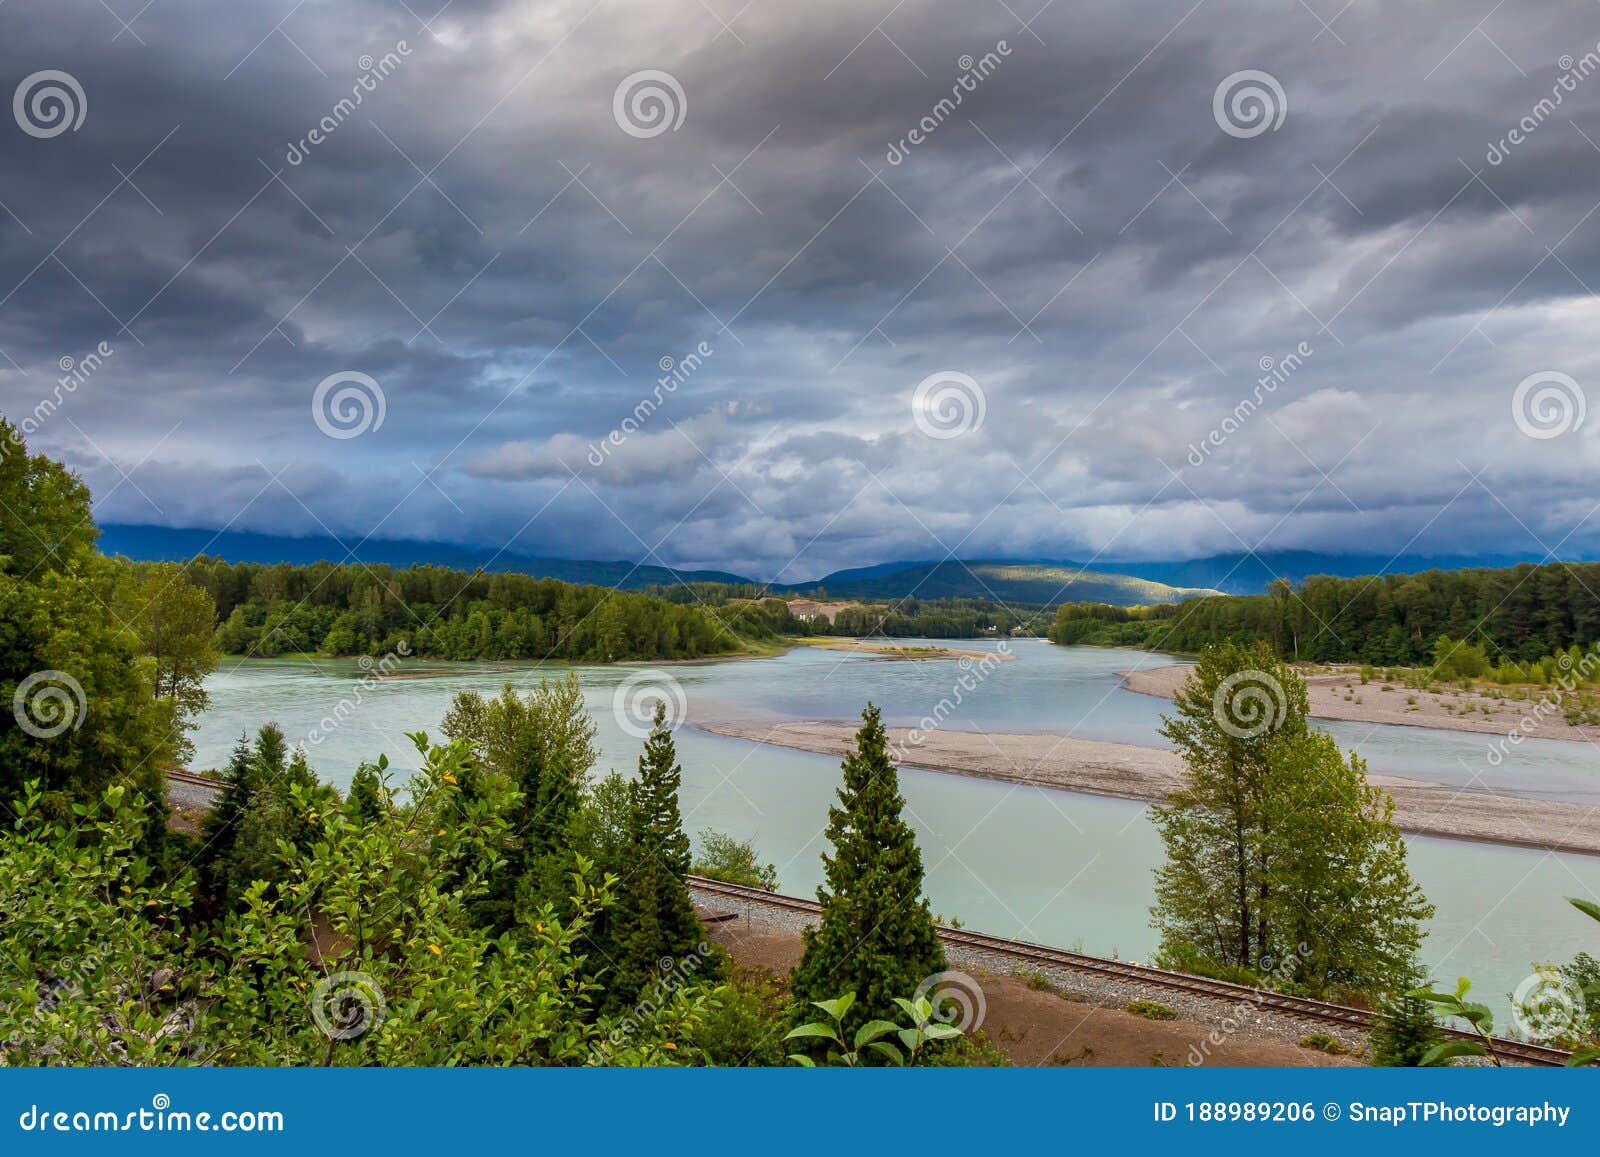 looking upstream on the skeena river towards terrace, at the kallum river confluence, beside the cn railway line